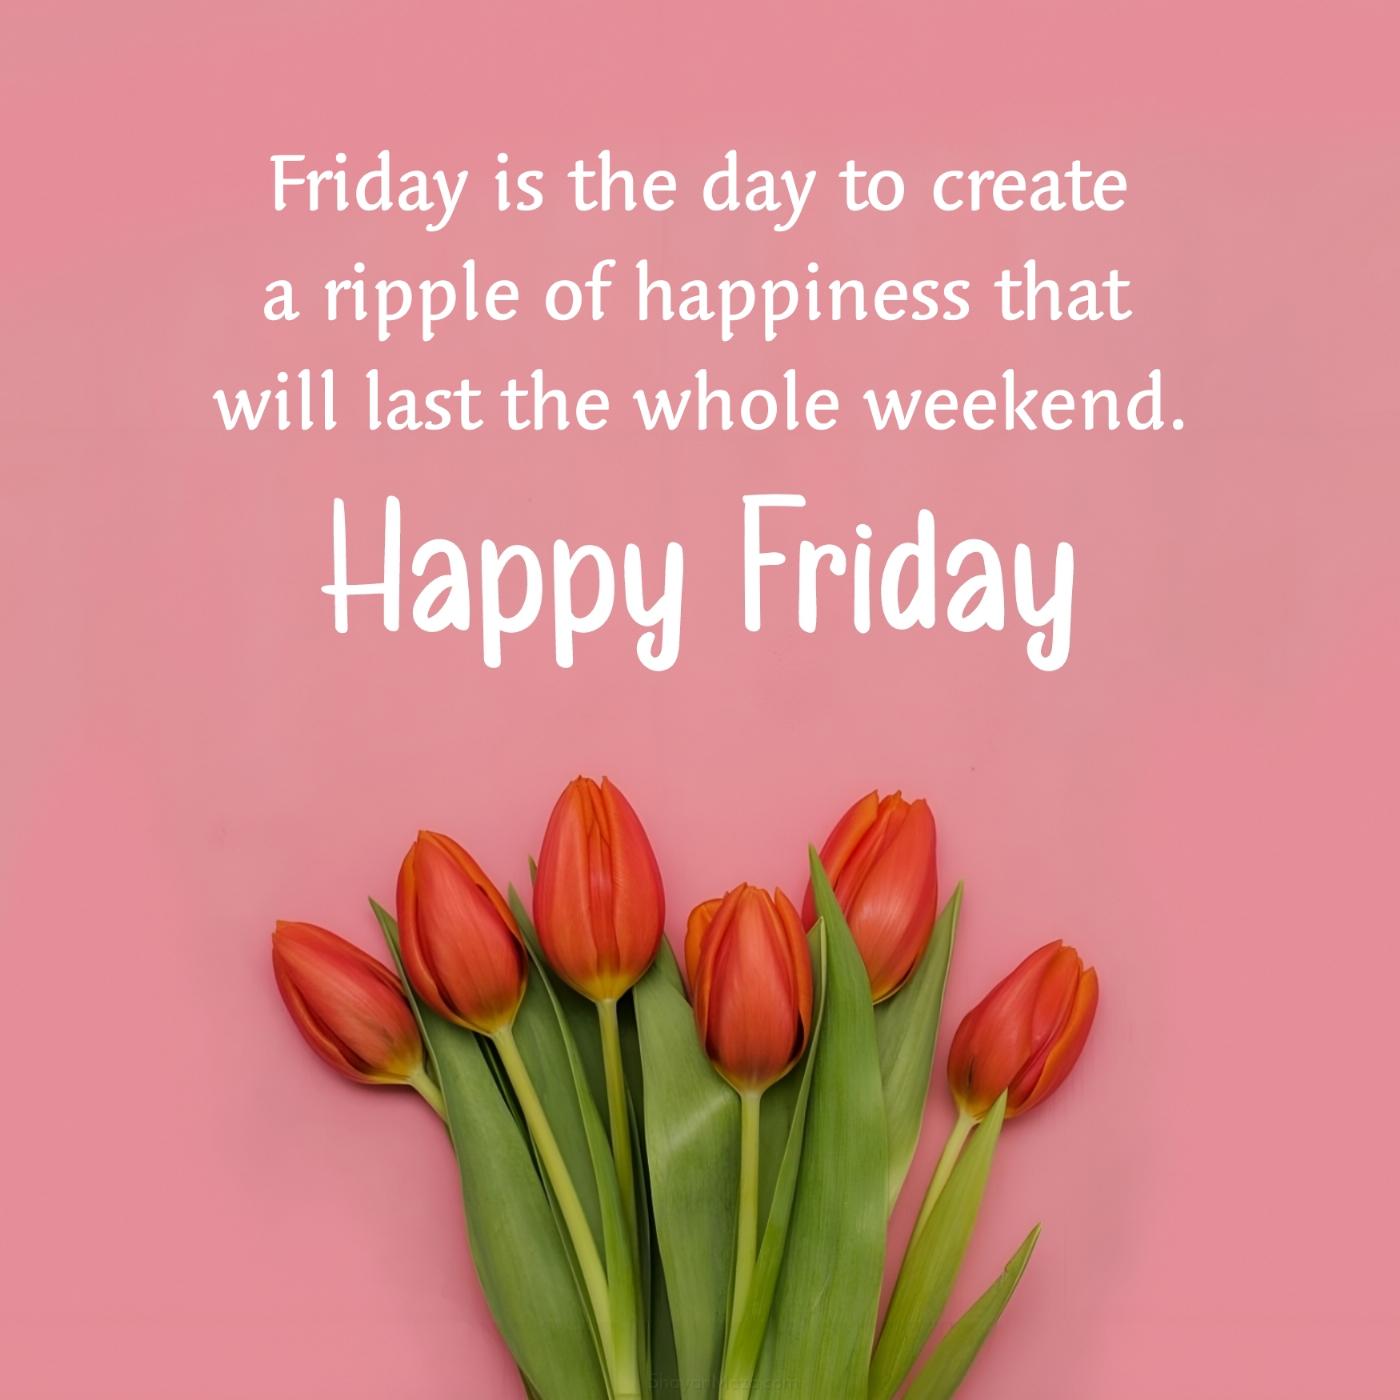 Friday is the day to create a ripple of happiness